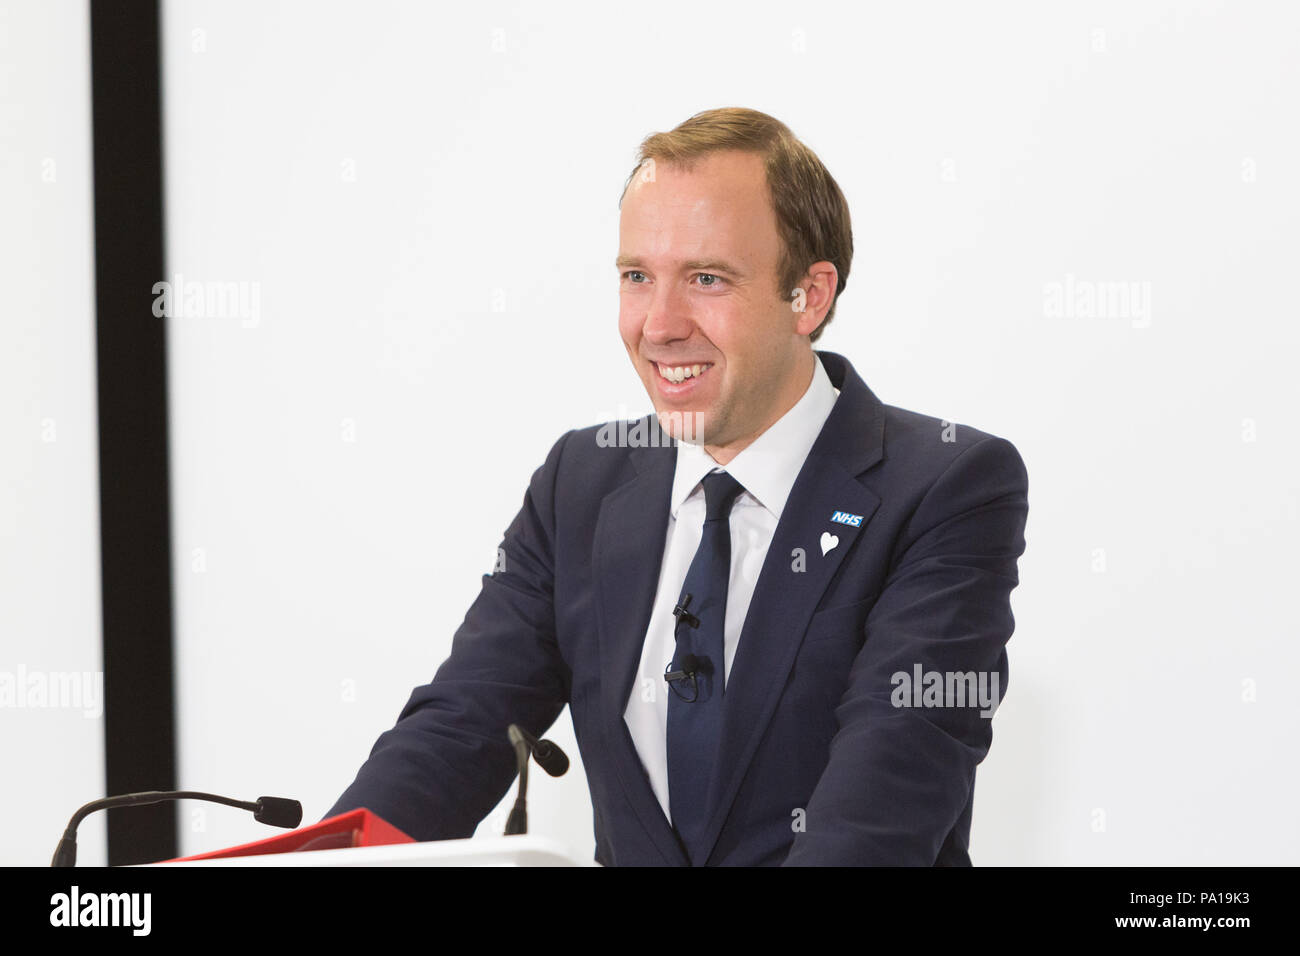 Bury St Edmunds, UK. 20th July 2018. Matt Hancock newly appointed Health and Social Care Secretary unveils nearly half a billion pounds funding to NHS, at the West Suffolk Hospital. Stock Photo